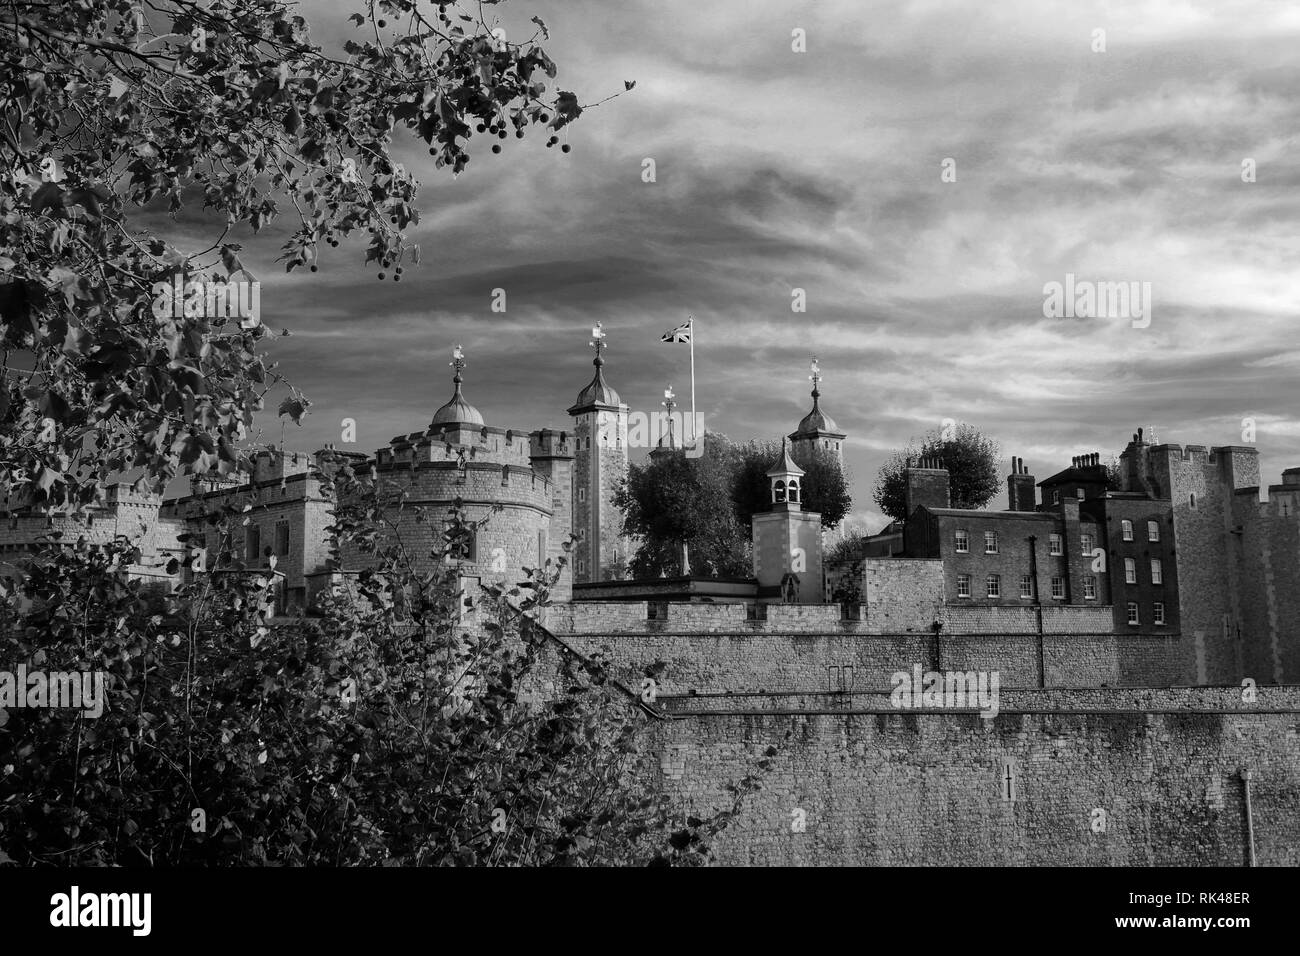 The walls and grounds of the Tower of London, North Bank river Thames, London City, England, UK Stock Photo